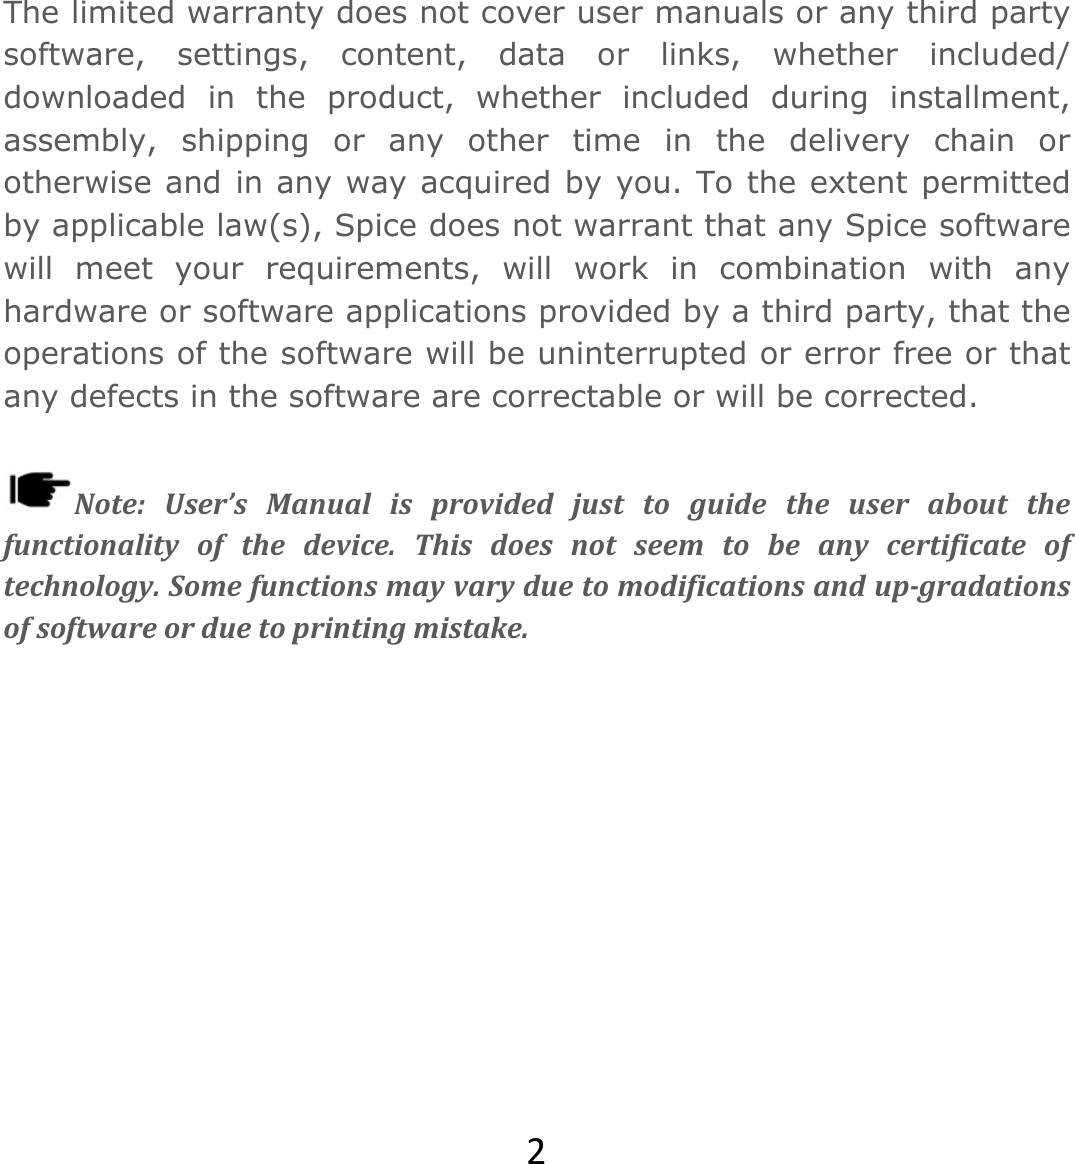 2The limited warranty does not cover user manuals or any third party software, settings, content, data or links, whether included/ downloaded in the product, whether included during installment, assembly, shipping or any other time in the delivery chain or otherwise and in any way acquired by you. To the extent permitted by applicable law(s), Spice does not warrant that any Spice software will meet your requirements, will work in combination with any hardware or software applications provided by a third party, that the operations of the software will be uninterrupted or error free or that any defects in the software are correctable or will be corrected.  Note:User’sManualisprovidedjusttoguidetheuseraboutthefunctionalityofthedevice.Thisdoesnotseemtobeanycertificateoftechnology.Somefunctionsmayvaryduetomodificationsandup‐gradationsofsoftwareorduetoprintingmistake.